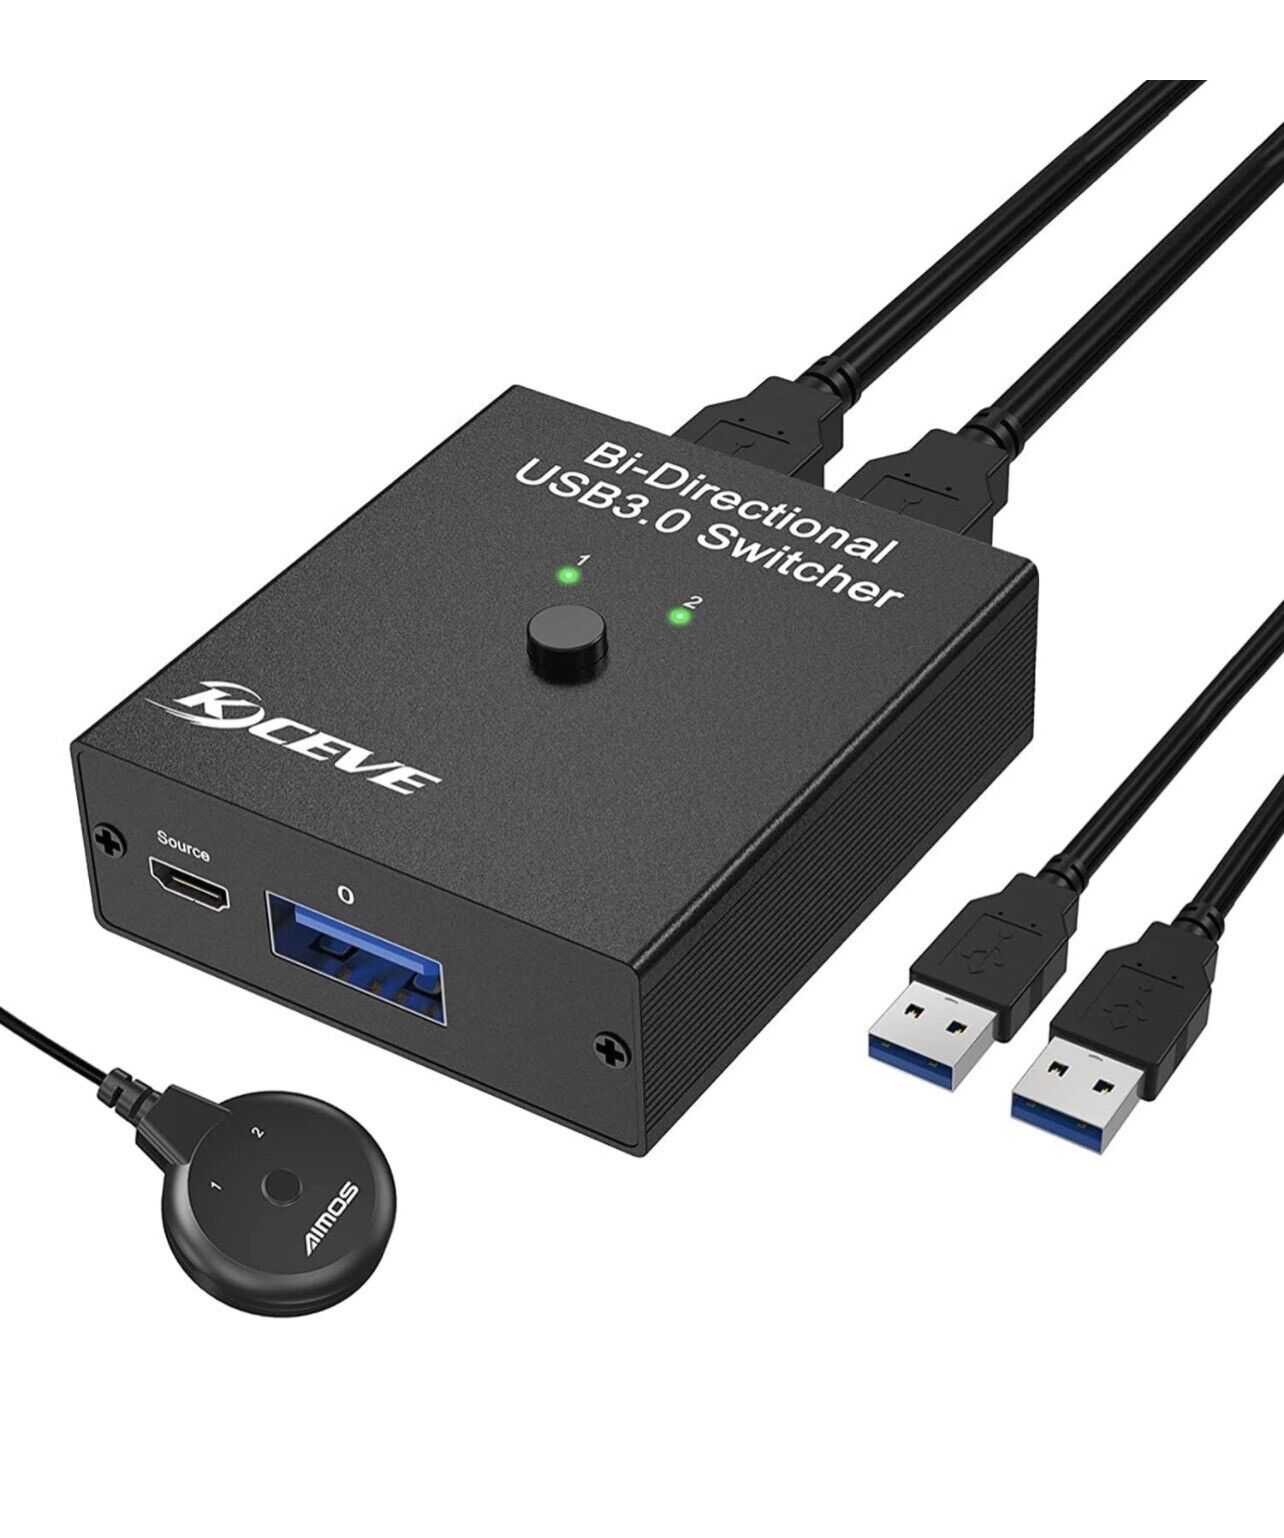 USB 3.0 Switch Selector, Bi-Directional USB Switch 2 in 1 Out / 1 in 2 Out, MLEE